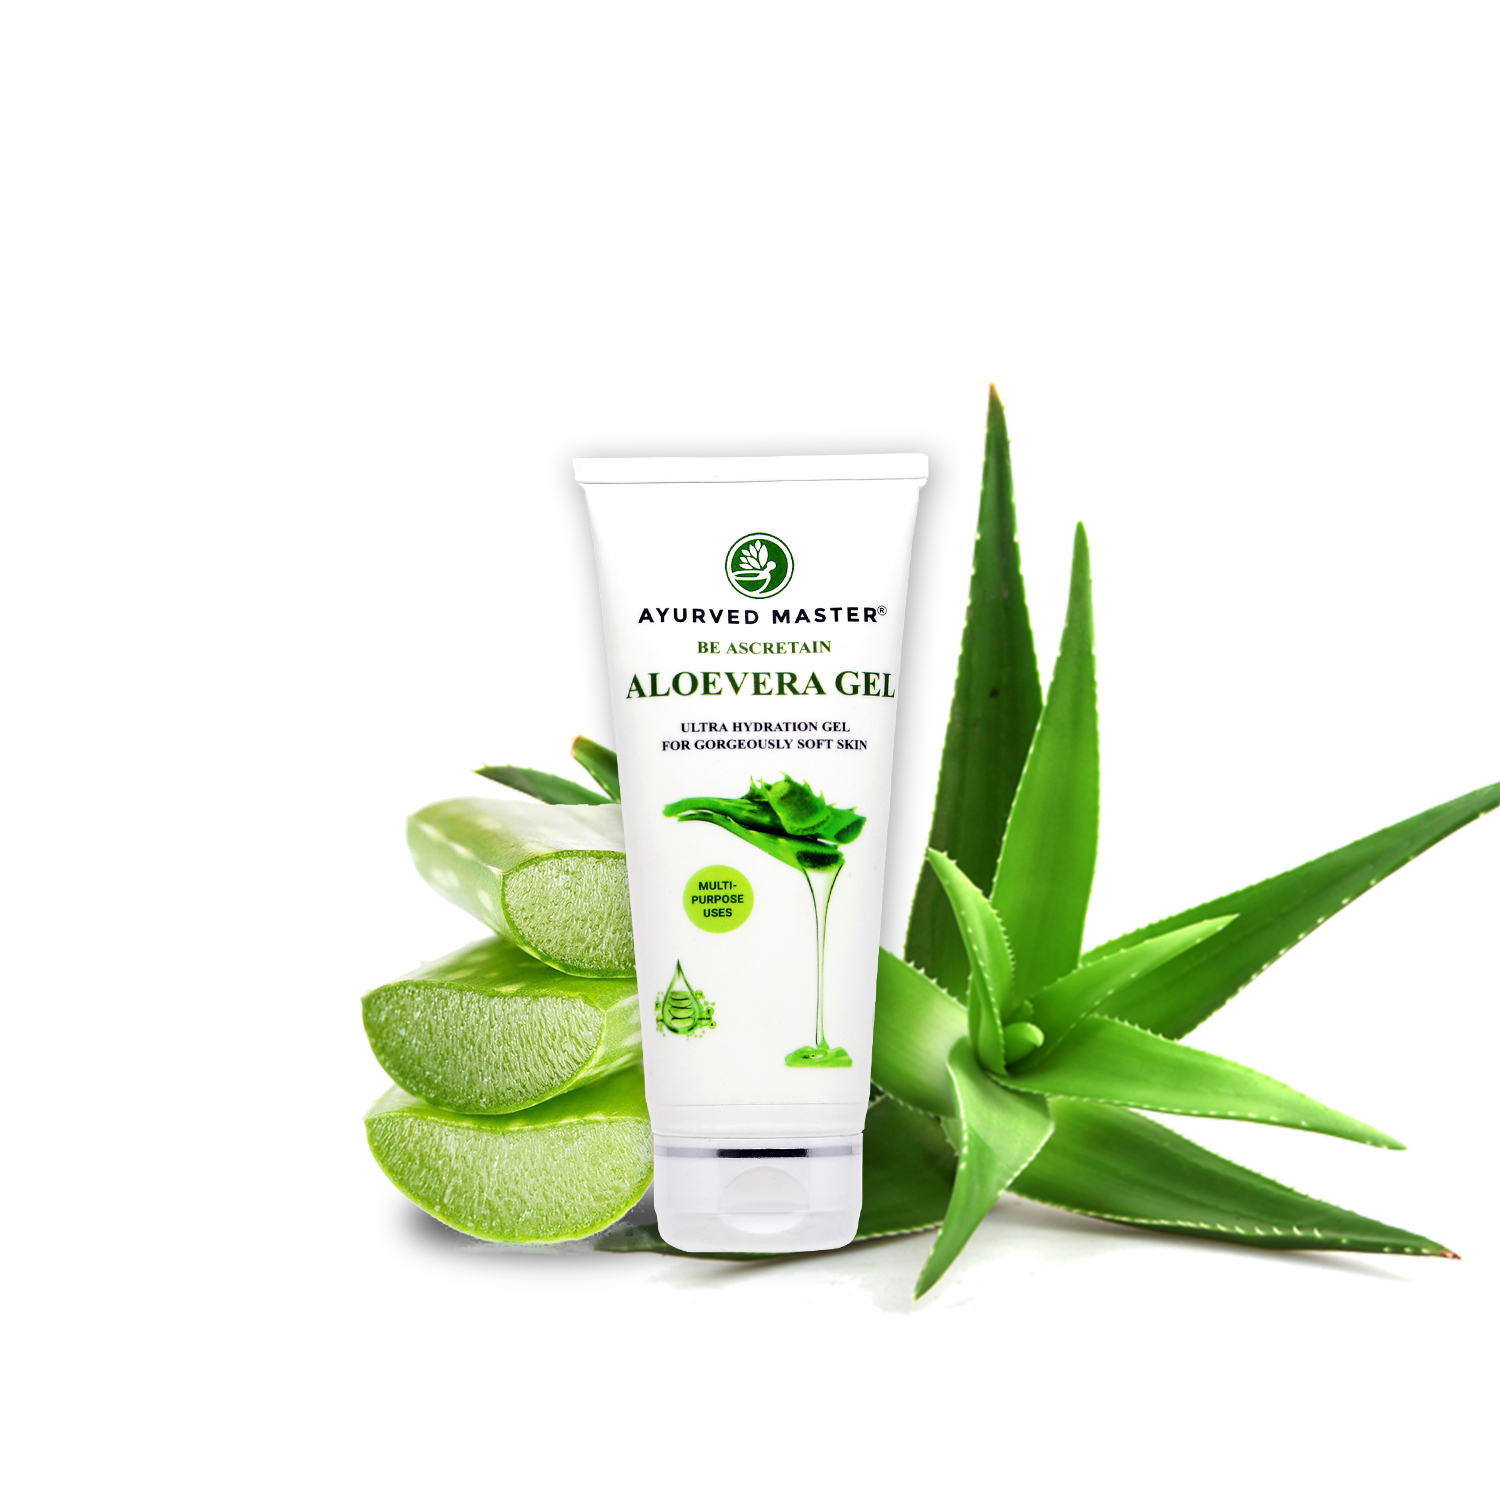 Premium Quality Ultra Hydrating and ultra  Moisturizing Aloevera gel, this is Upto 99% Pure Aloe Vera Gel it is used for Silky, Soft and Smoothens Skin | 50GM